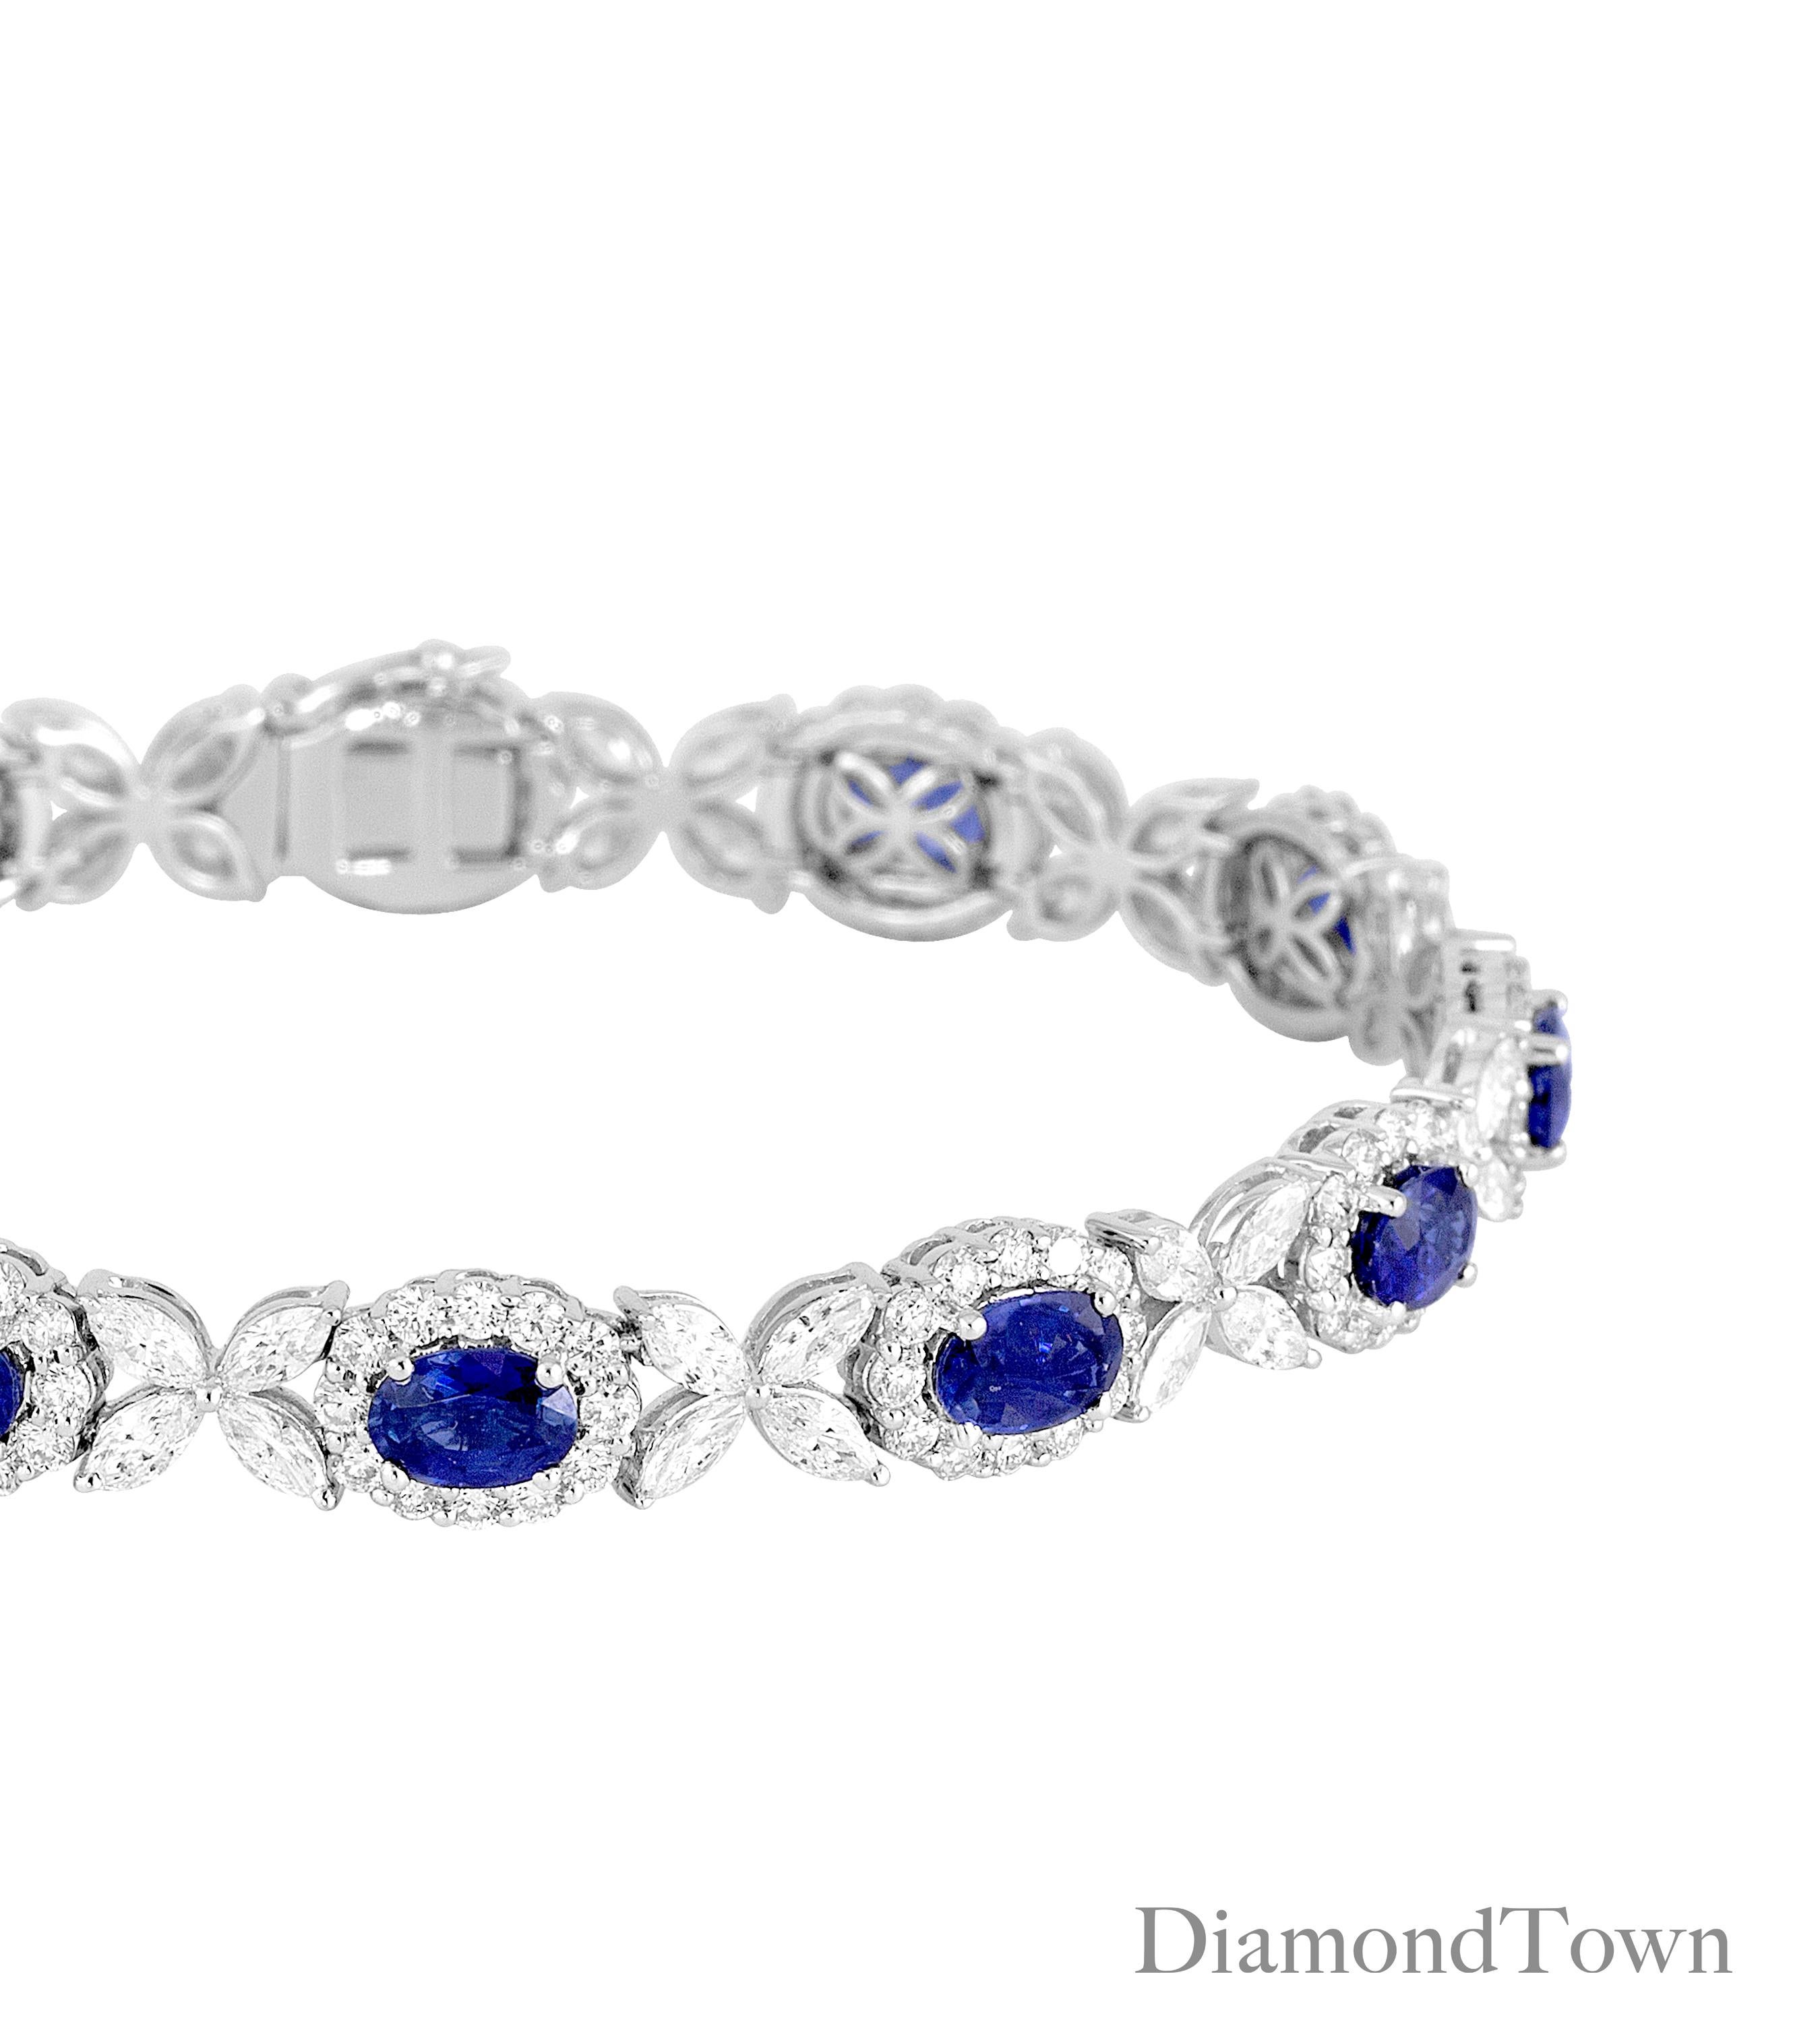 This bracelet features 11 Oval Cut Vivid Blue Sapphires (total weight 8.14 carats), each in a halo of round diamonds, and alternating with flowers of marquise cut diamonds. The total diamond weight is 6.95 carats.

Bracelet measures 7